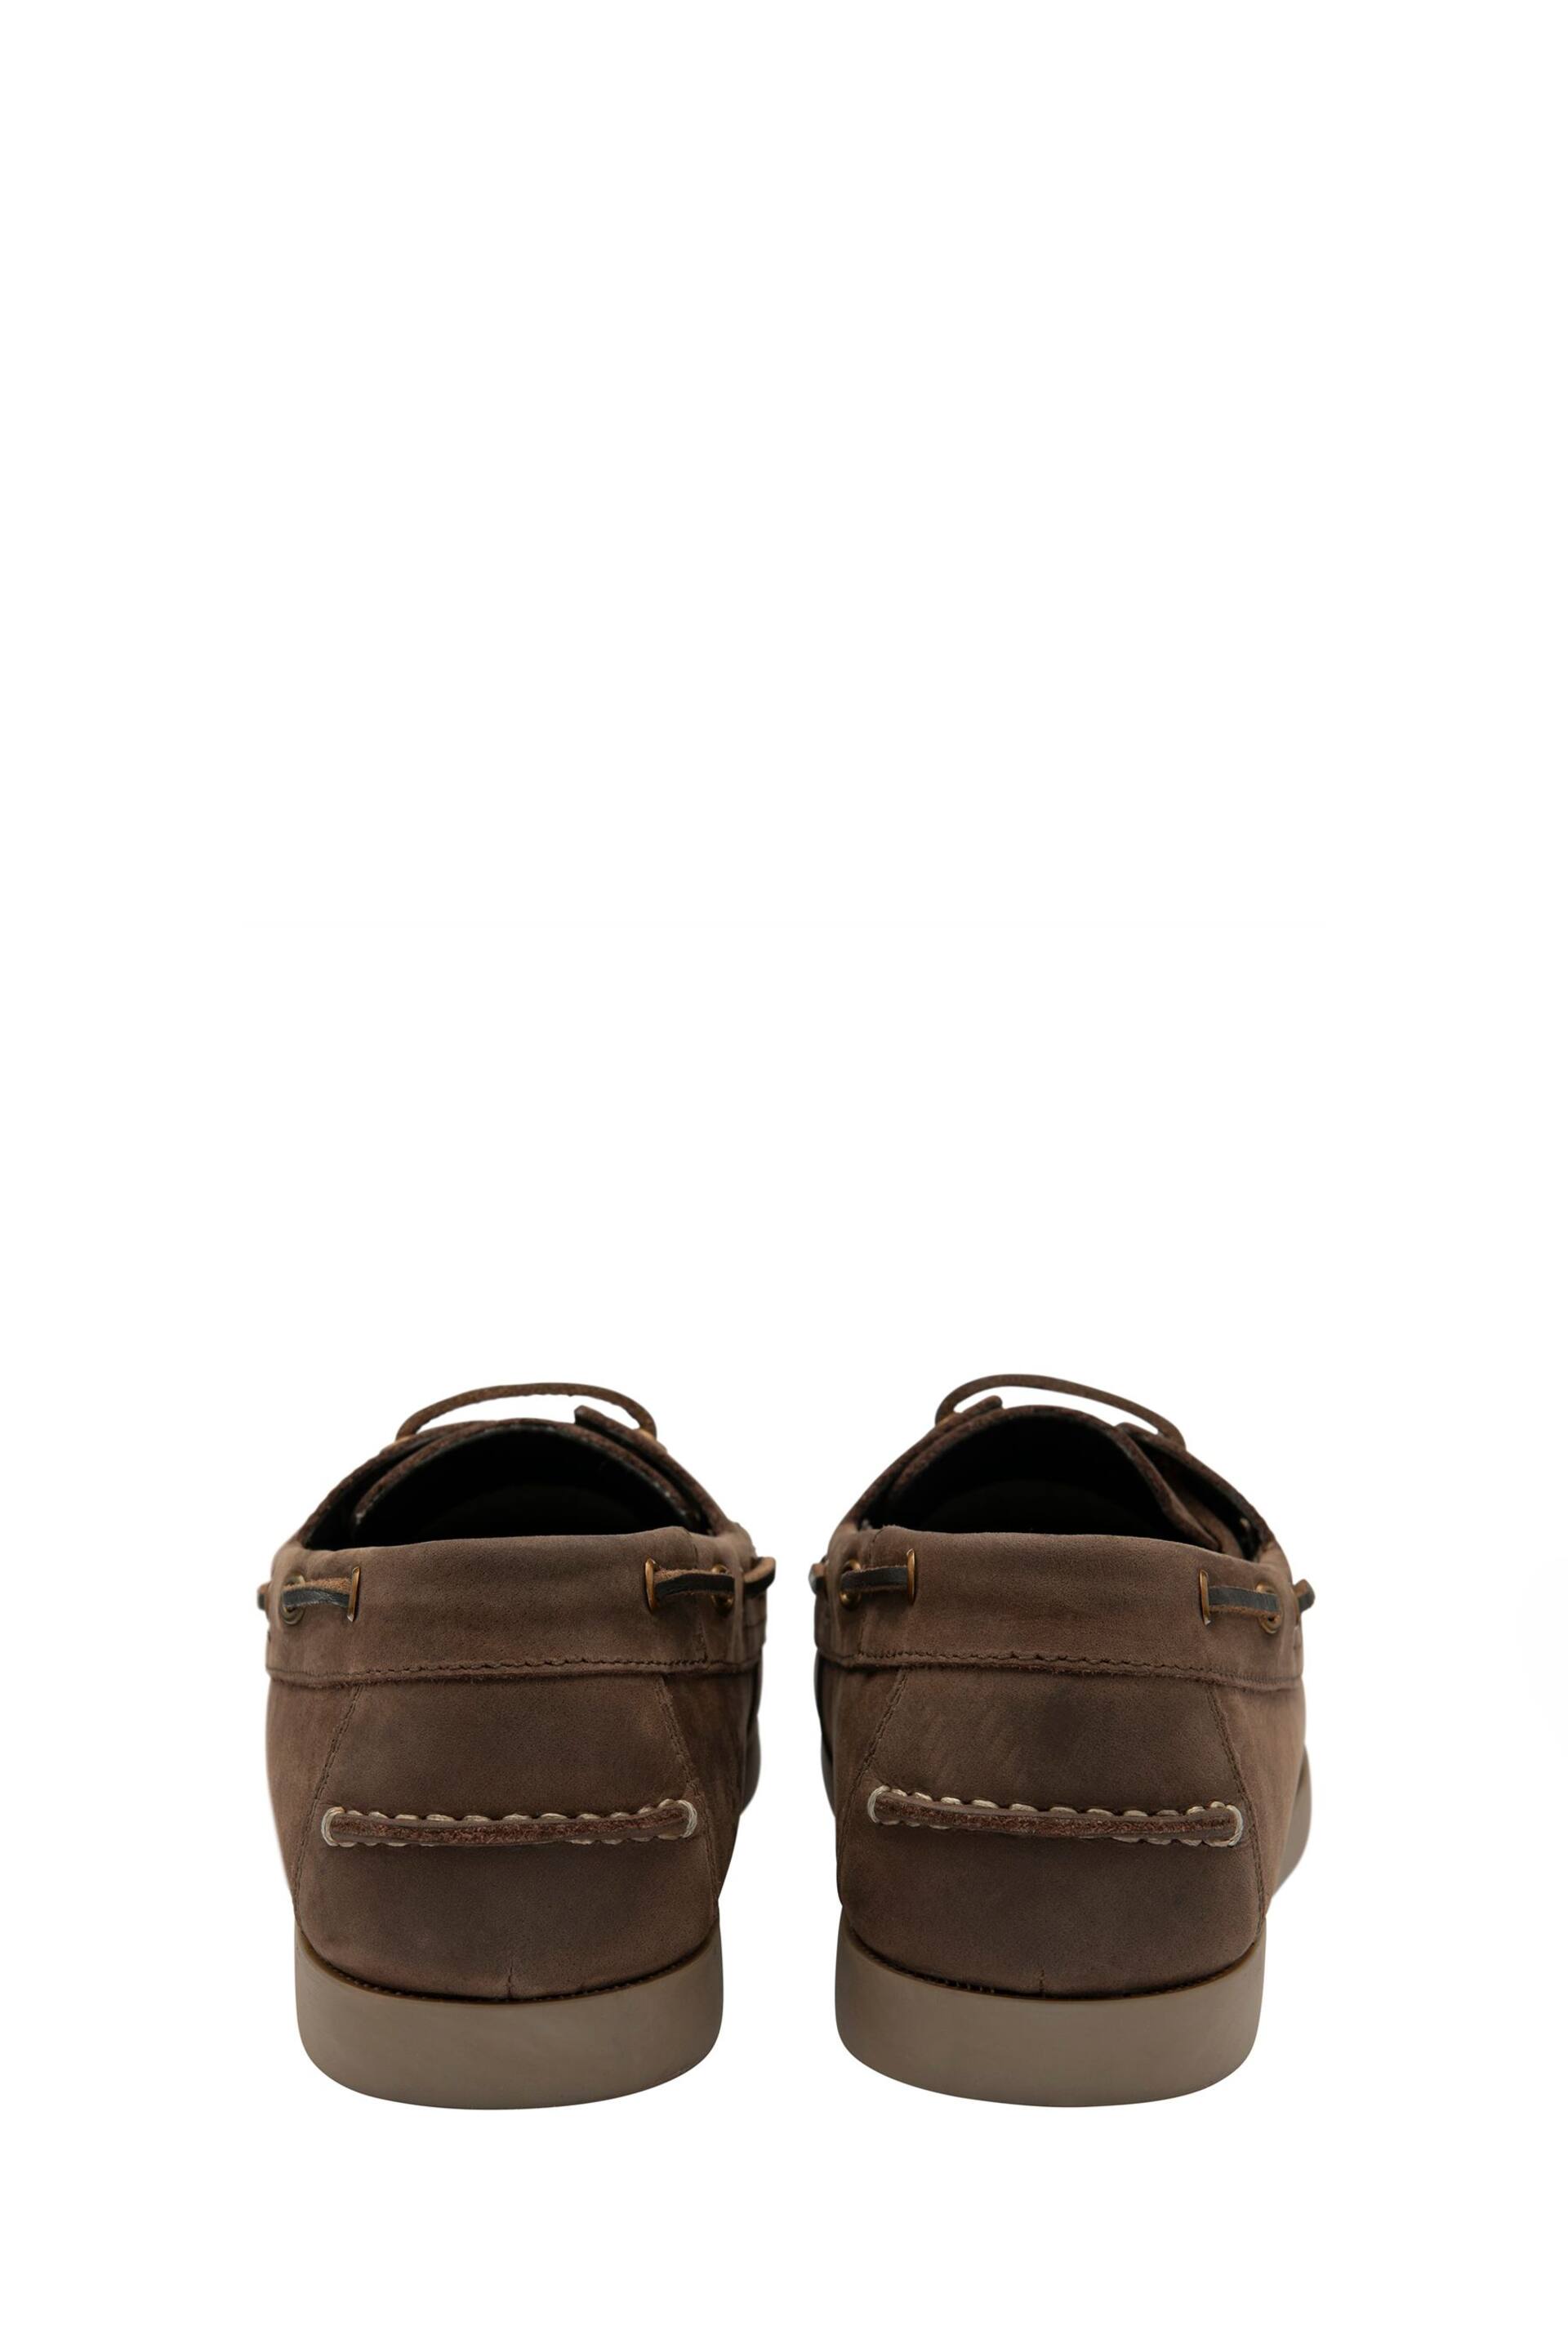 Lotus Brown Casual Boat Shoes - Image 3 of 4